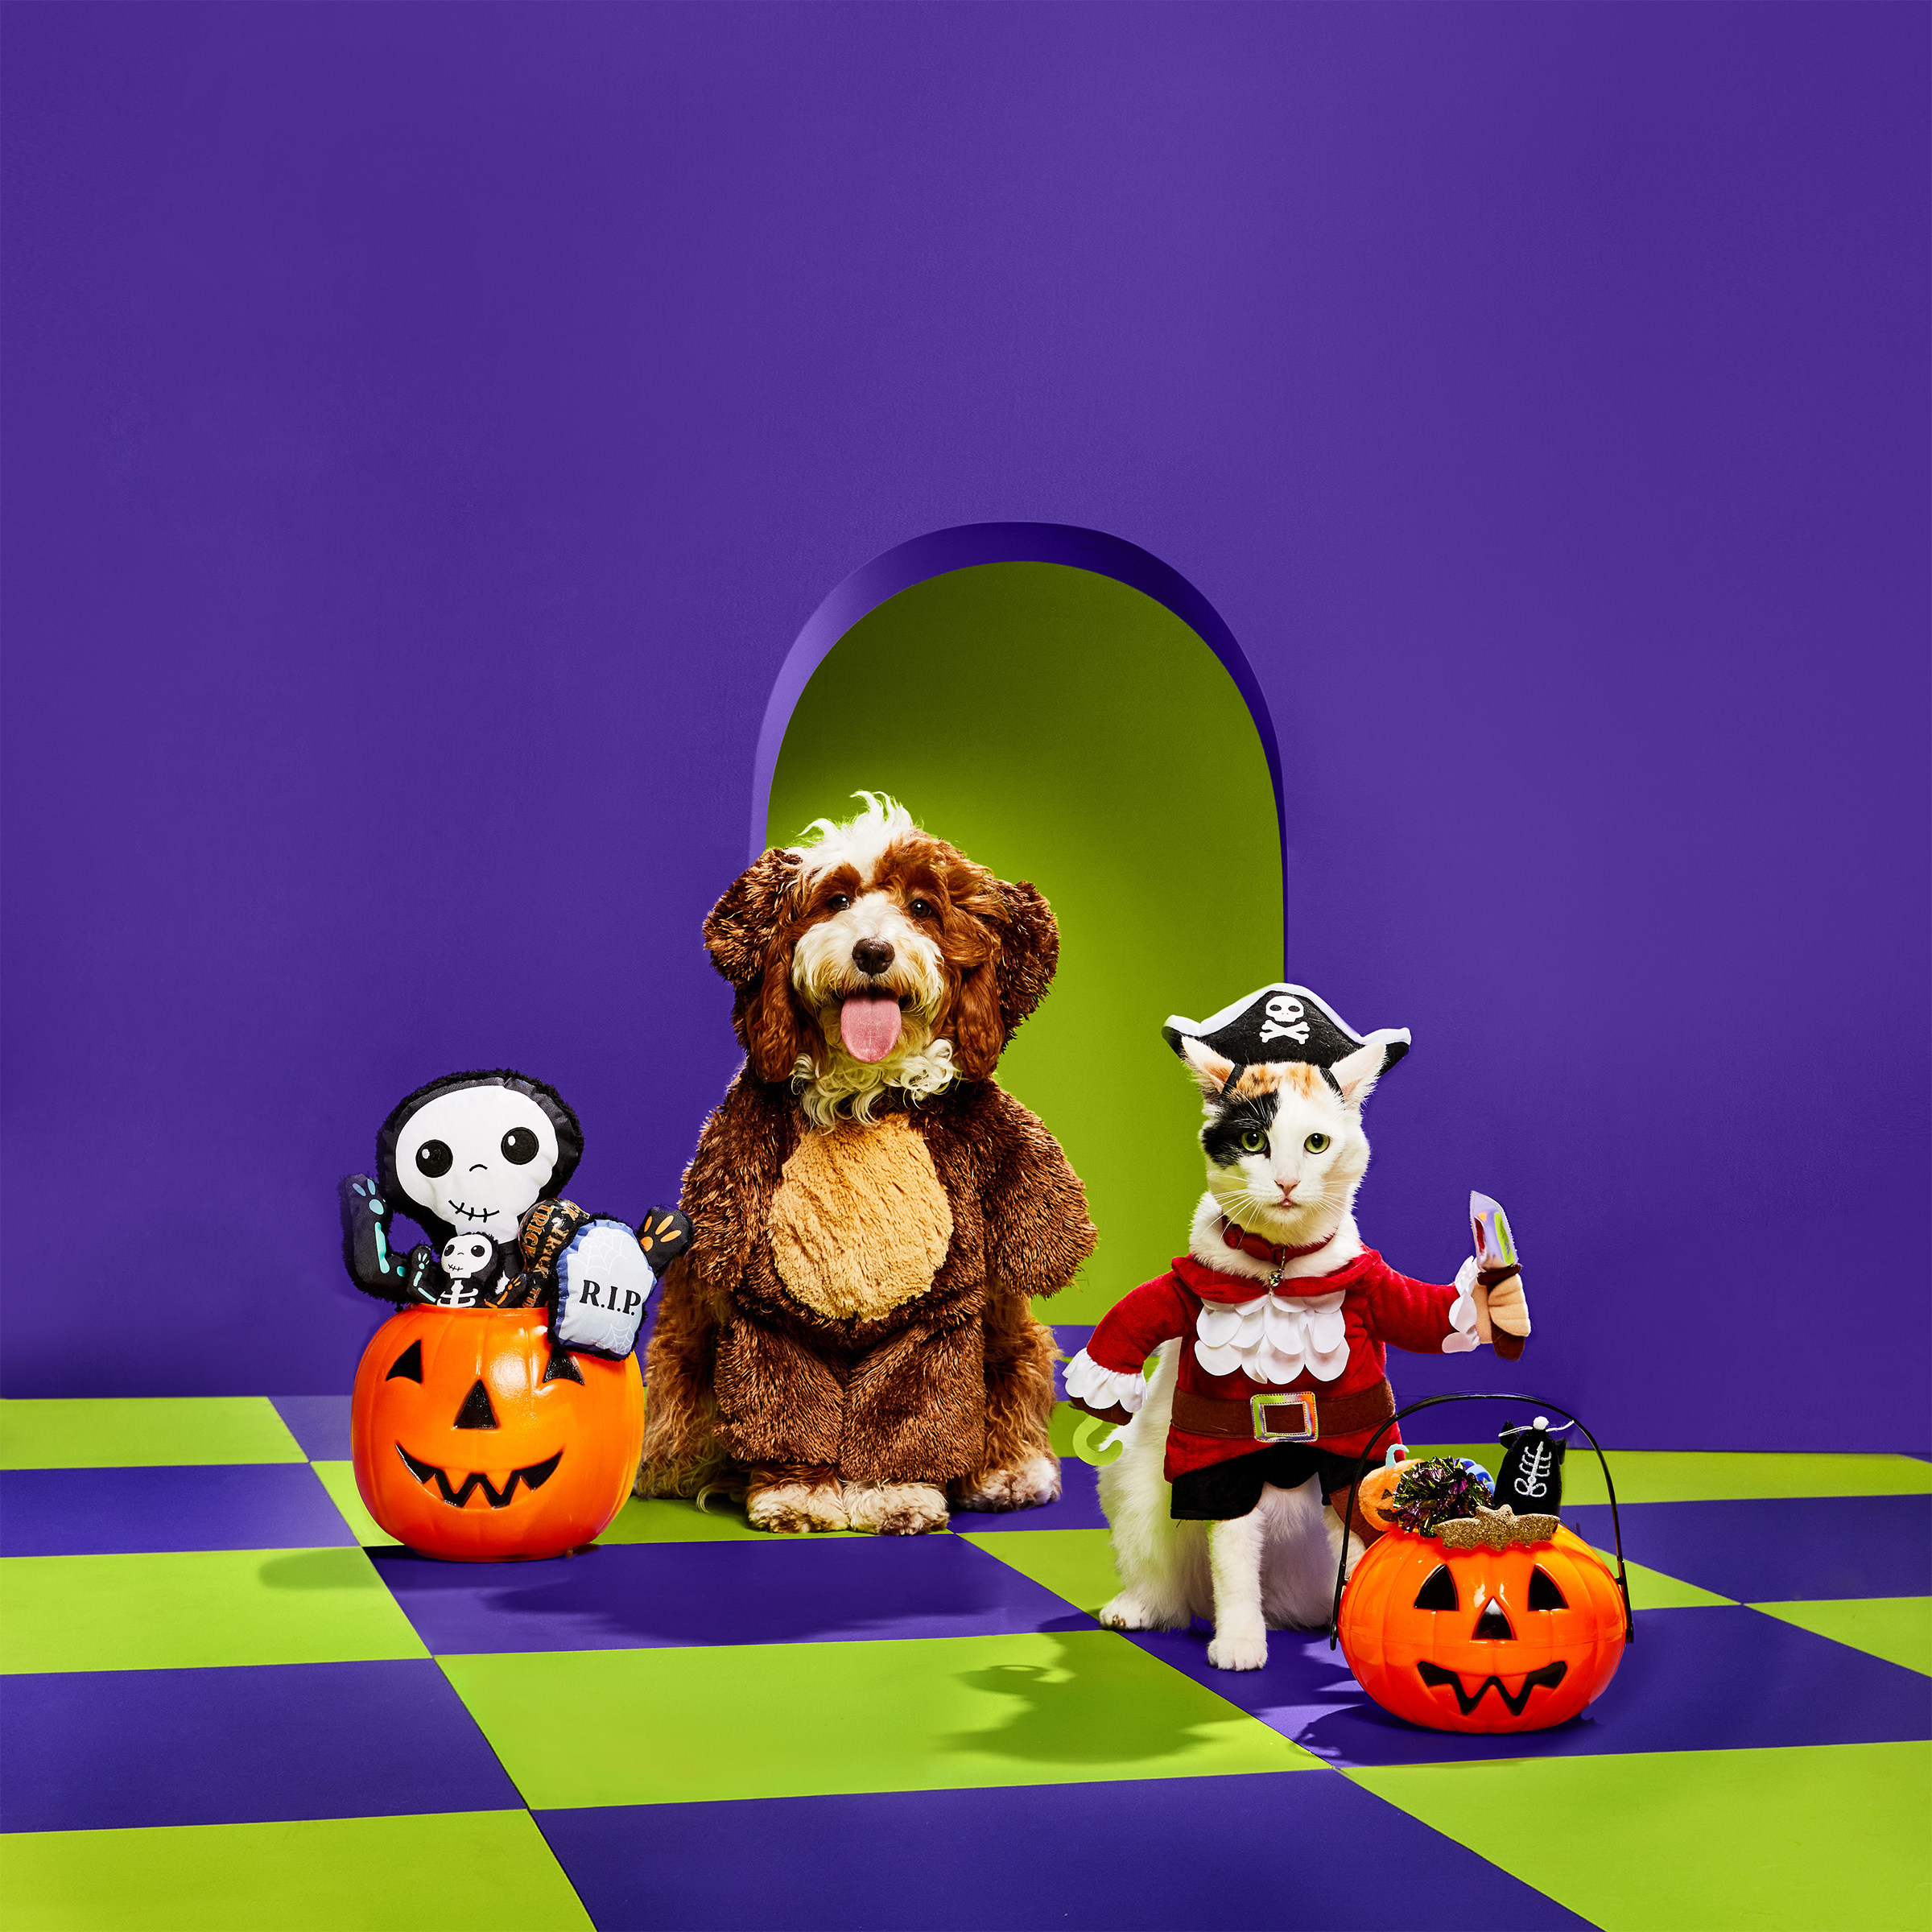 Petco Unveils Annual “Bootqiue” Collection with Expanded Halloween Offerings, New Night Safety Gear from Reddy